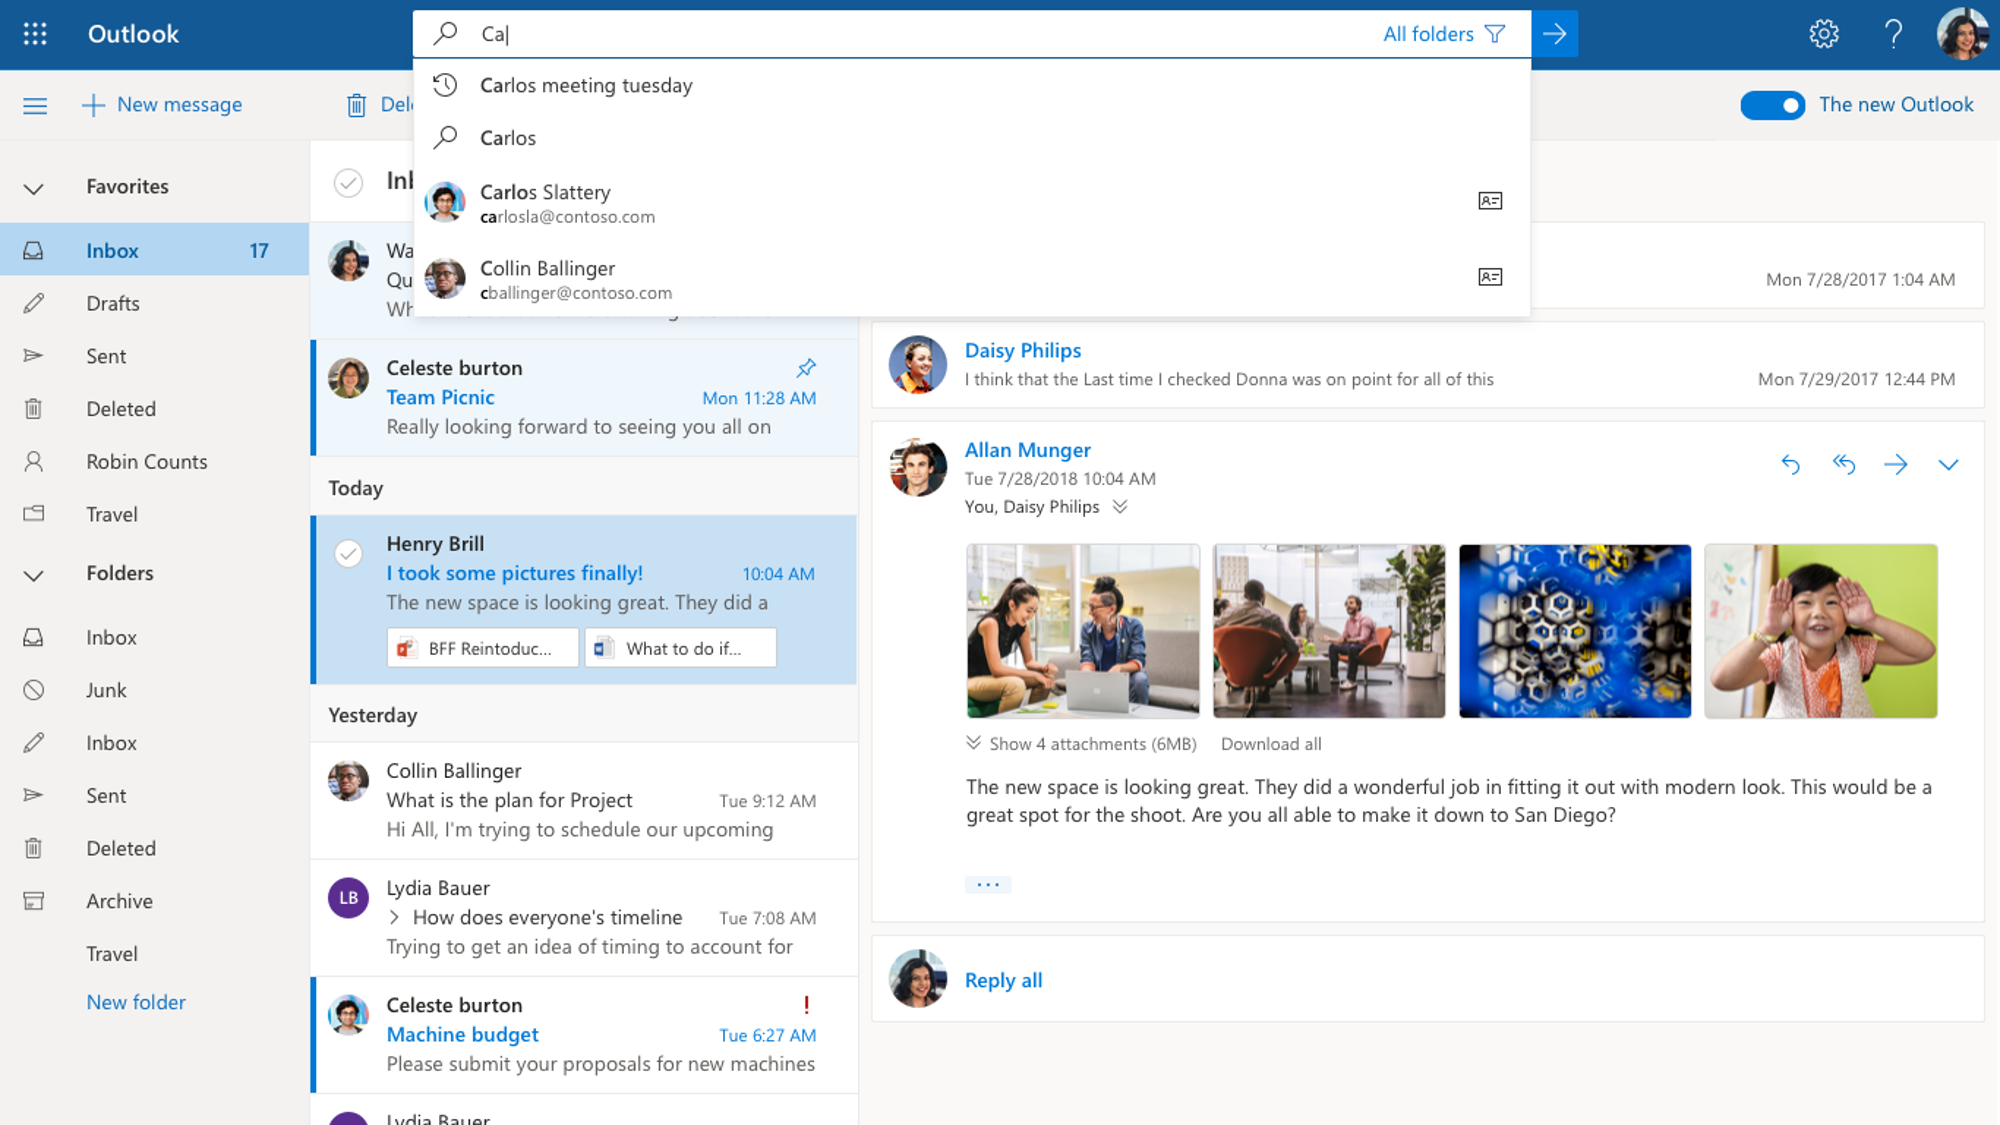 micro office 365 outlook